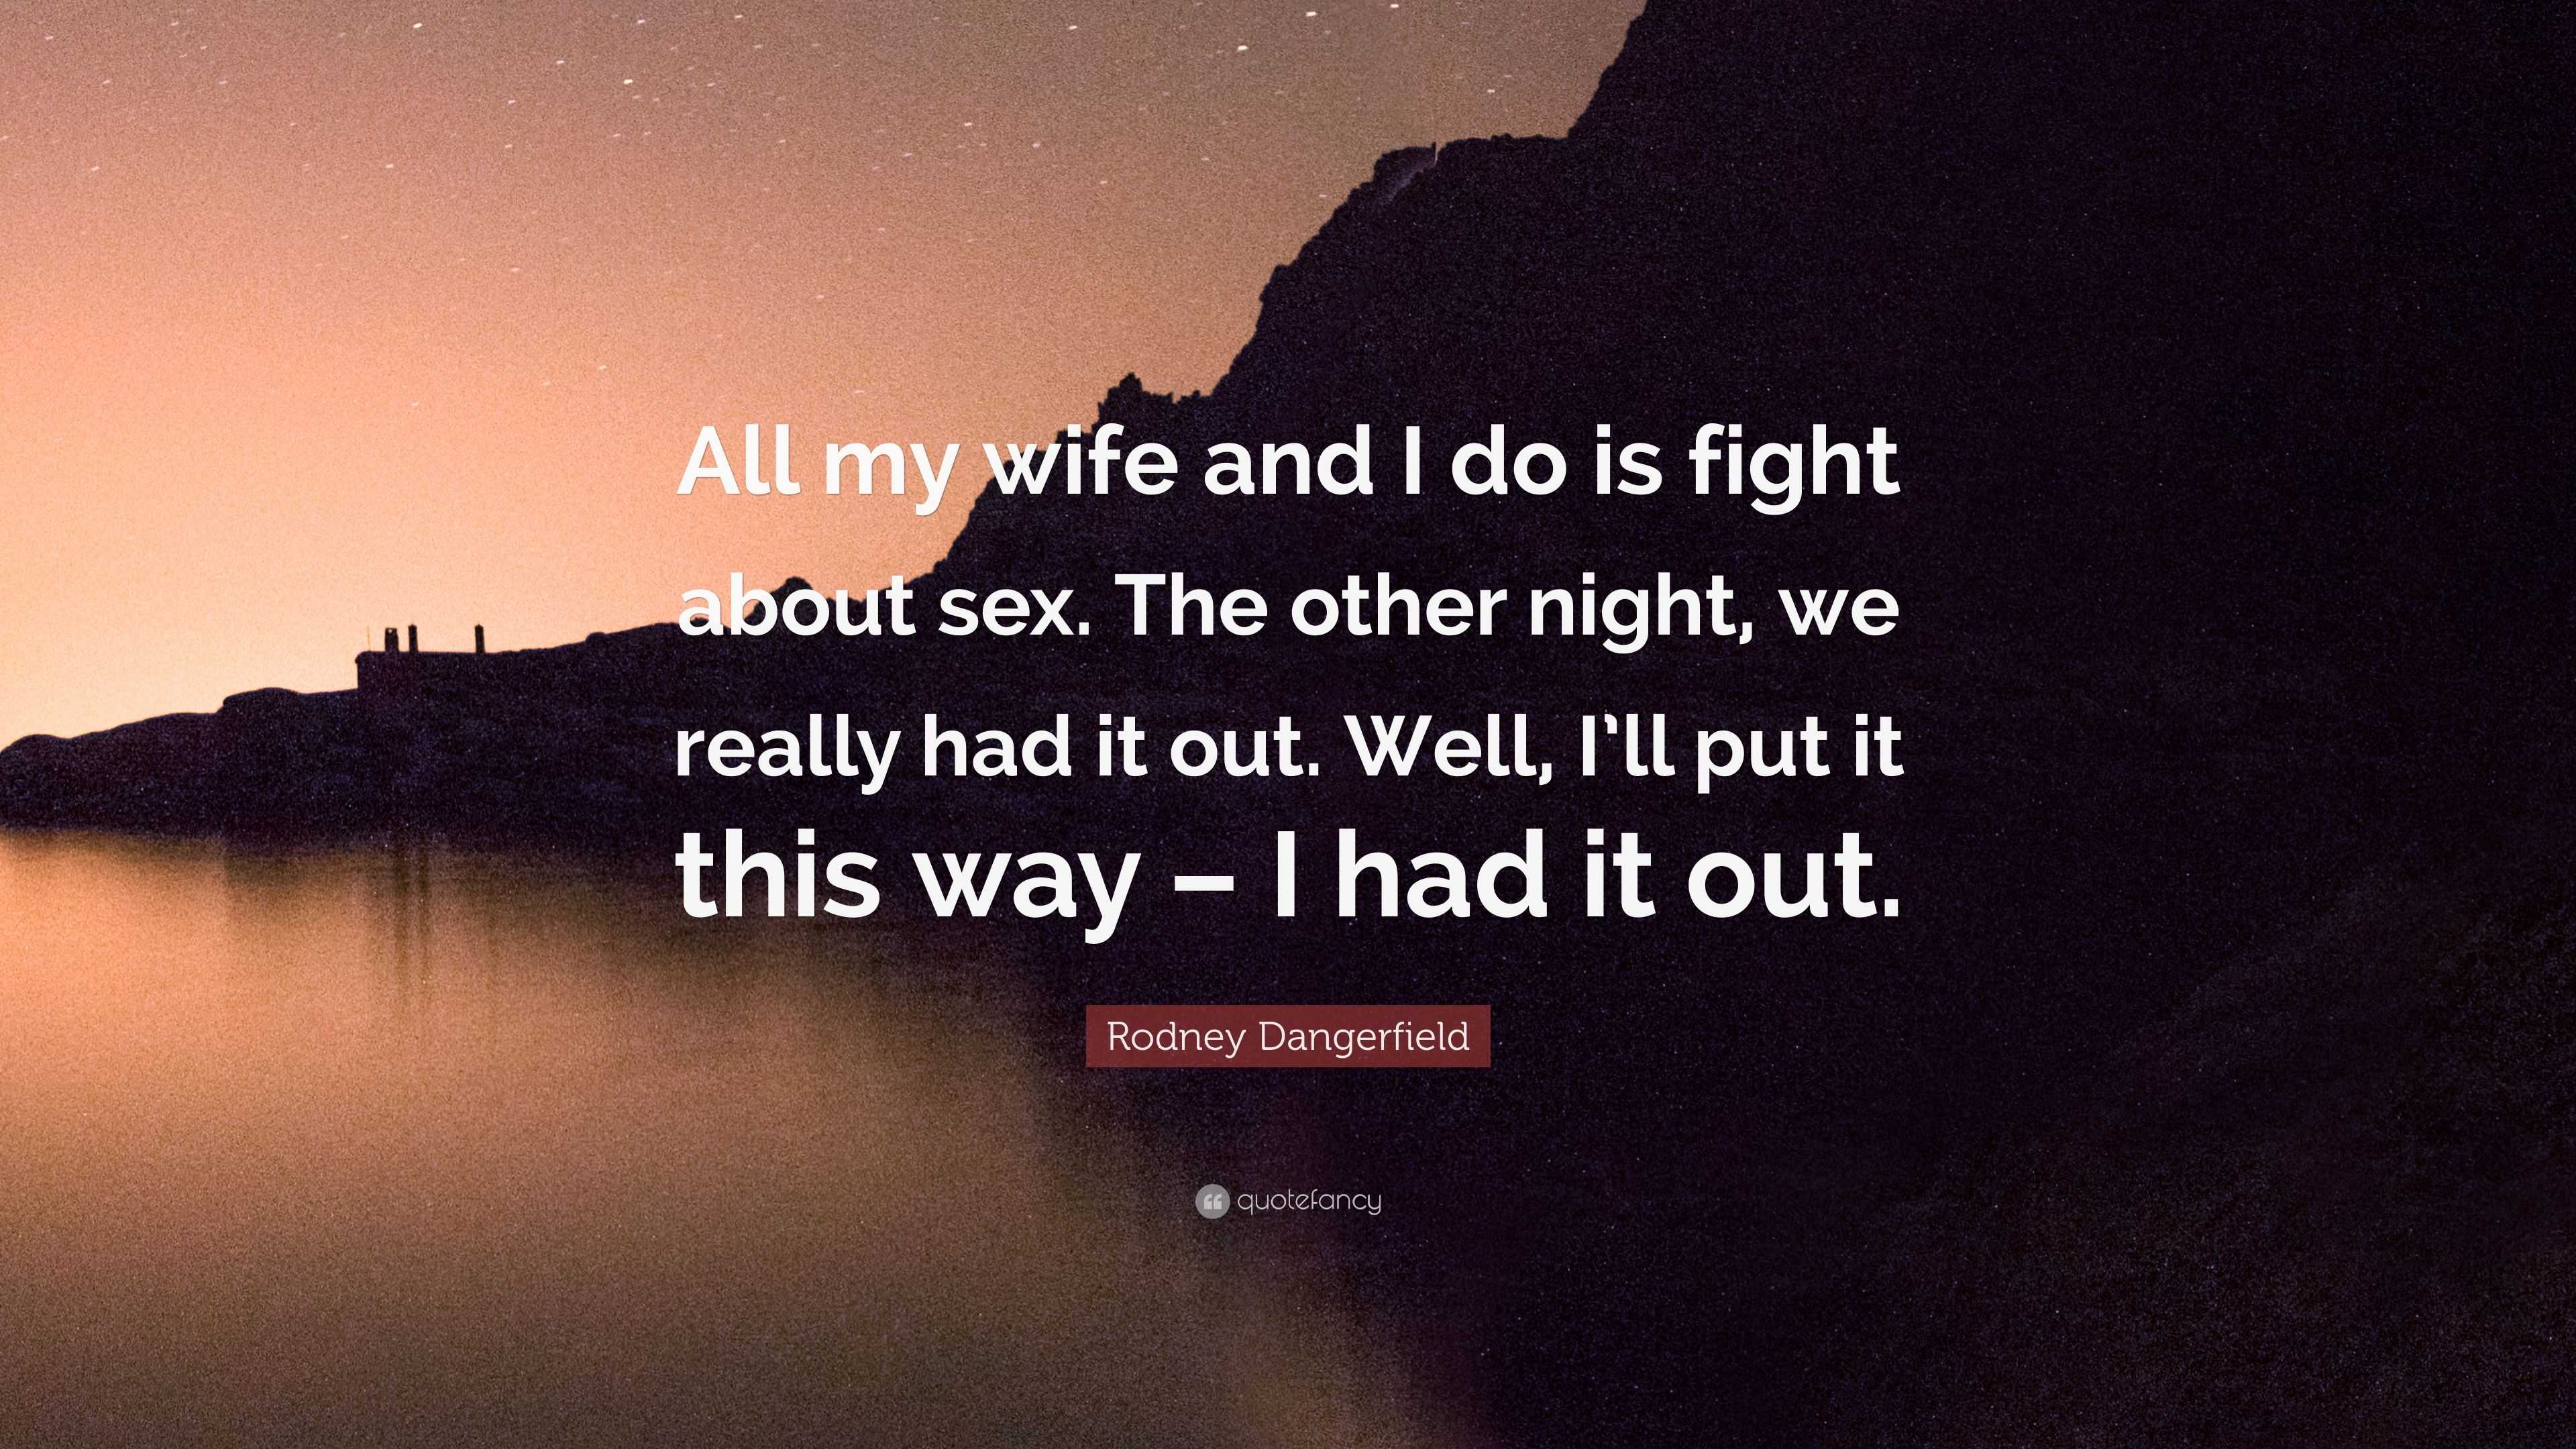 Rodney Dangerfield Quote “All my wife and I do is fight about picture